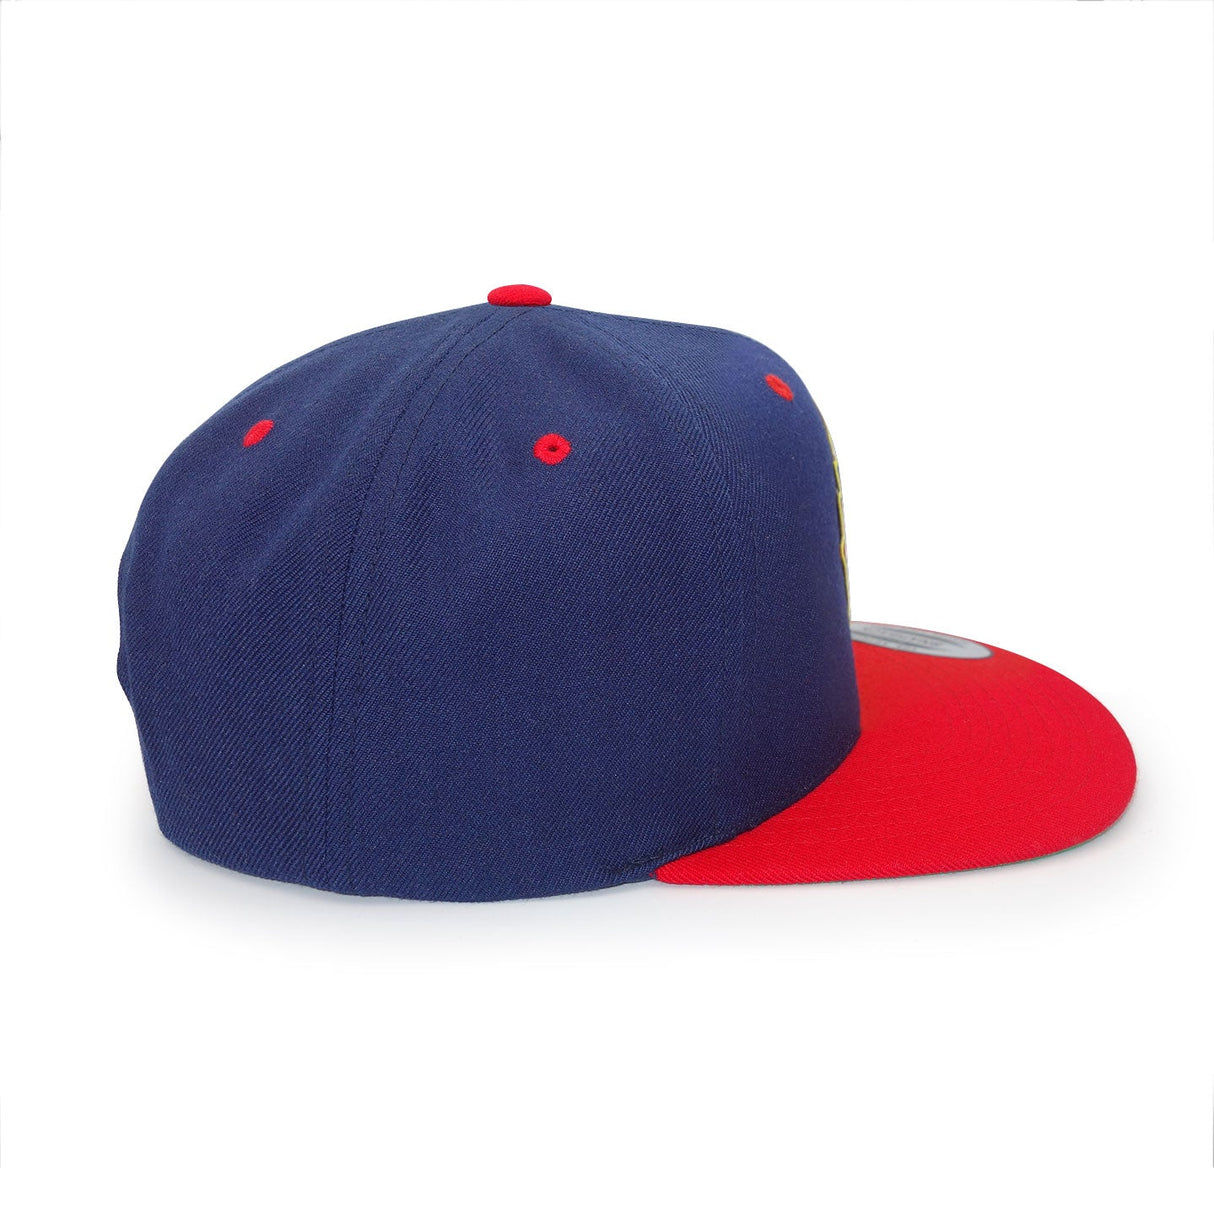 Great White North Navy and Red Flat Bill Snapback Cap